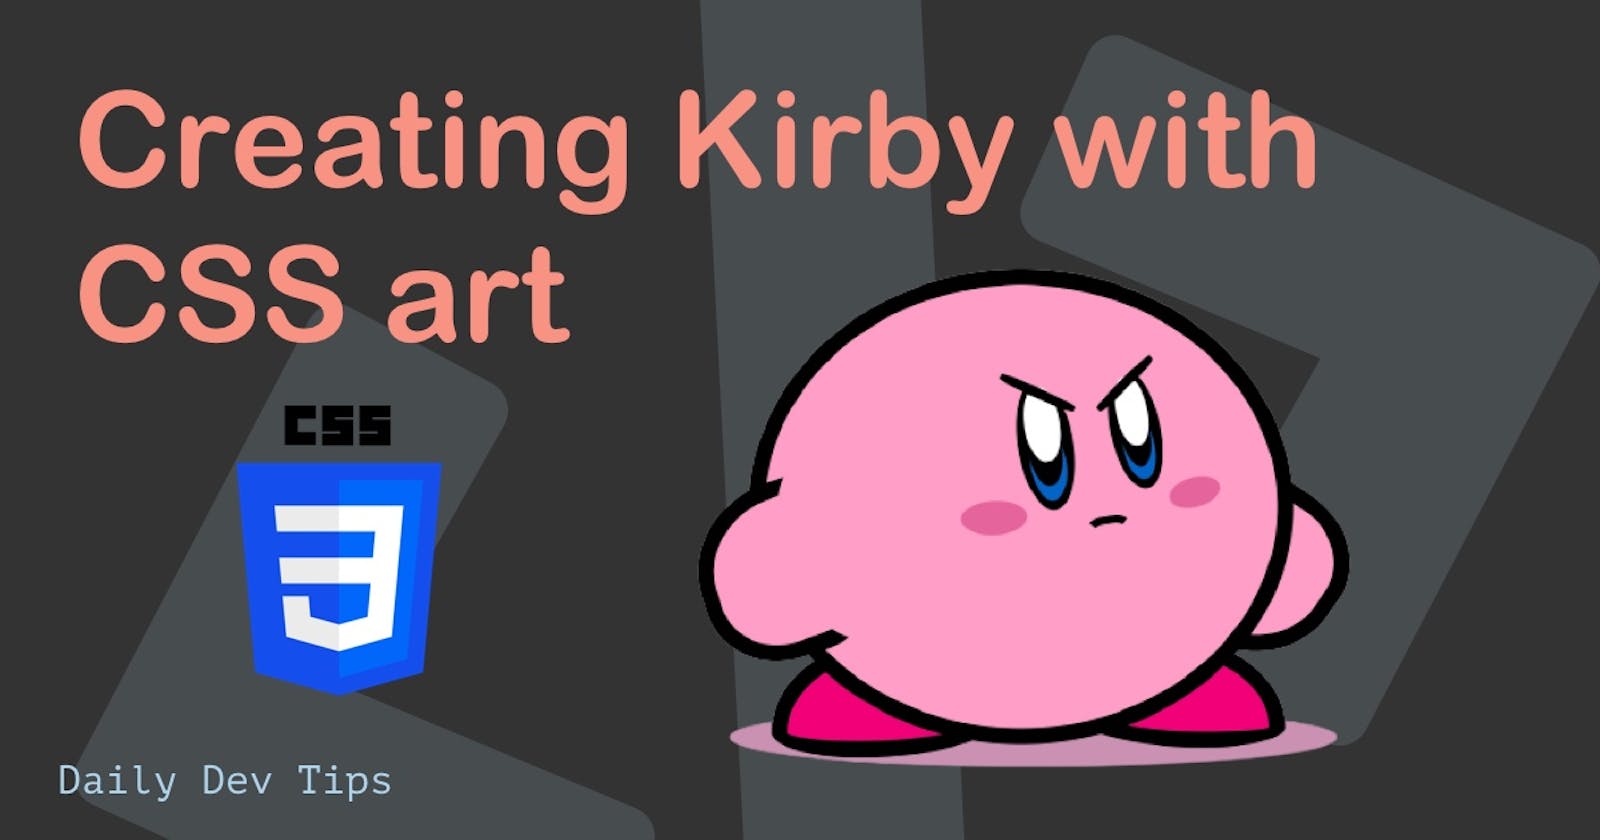 Creating Kirby with CSS art